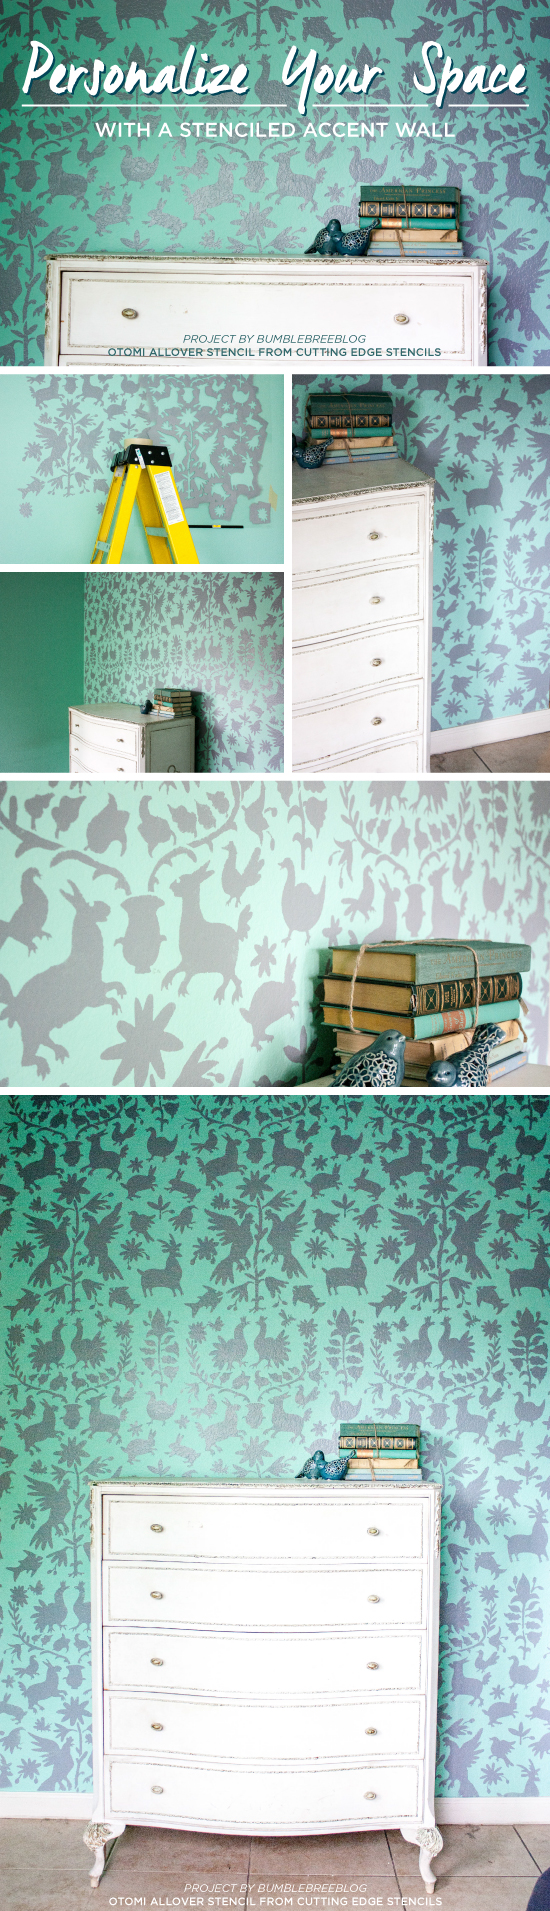 Cutting Edge Stencils shares a DIY stenciled accent wall in mint and gray using the Otomi Allover Stencil. http://www.cuttingedgestencils.com/otomi-tribal-wall-pattern-stencil.html